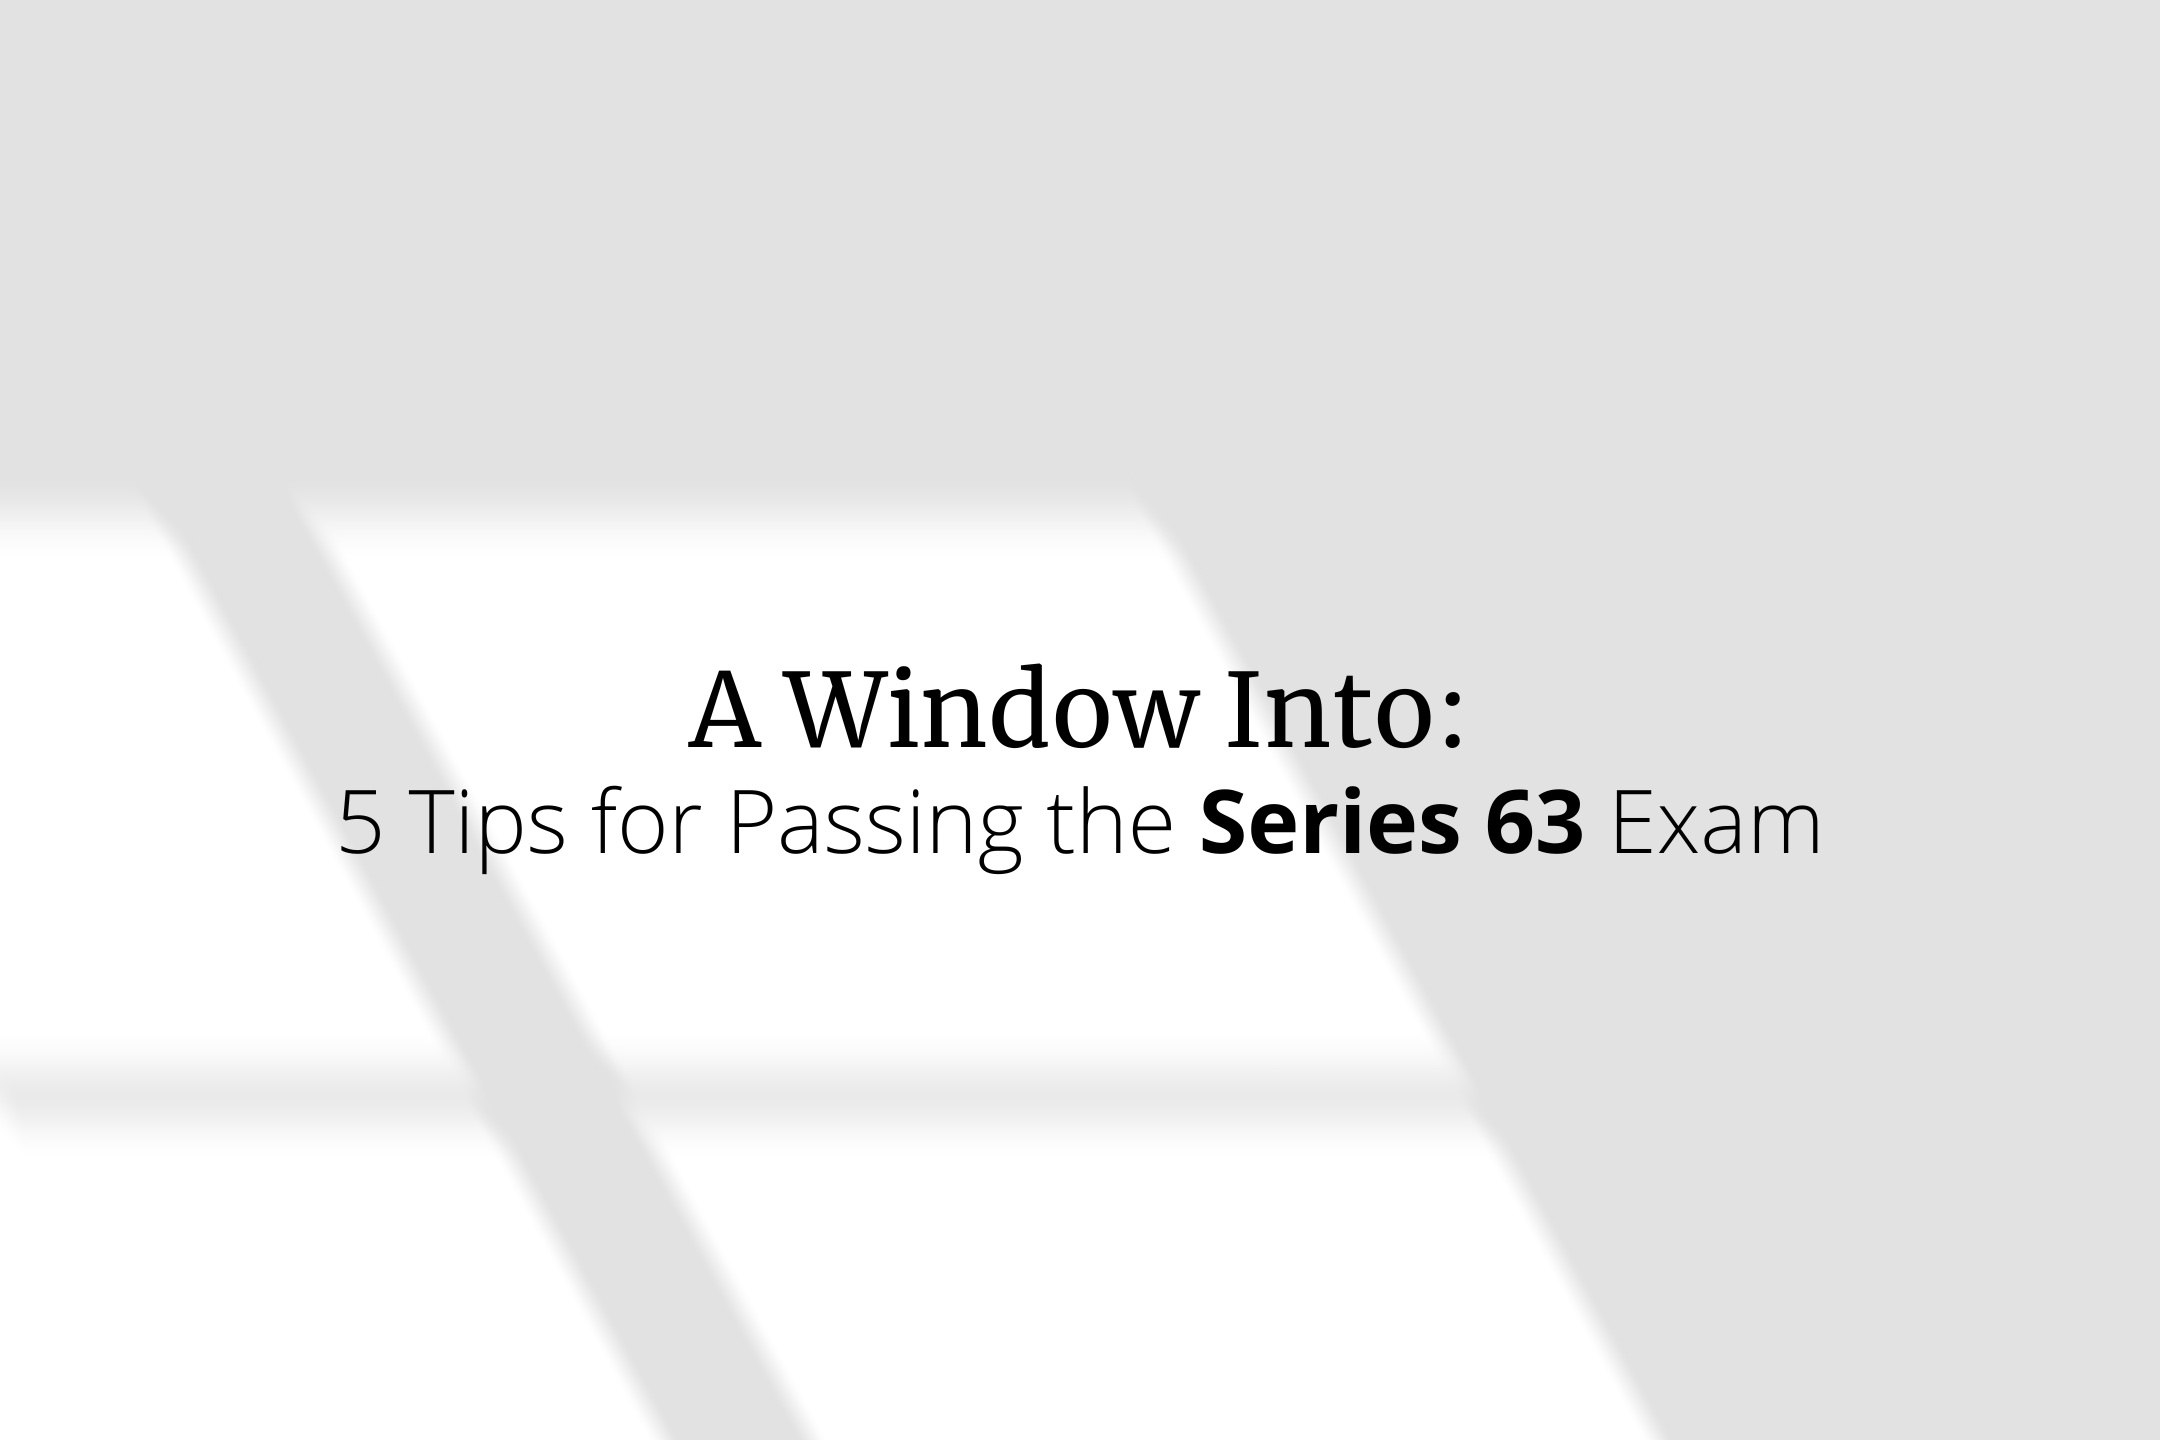 5 Tips to Increase Your Chances of Passing the Series 63 Exam